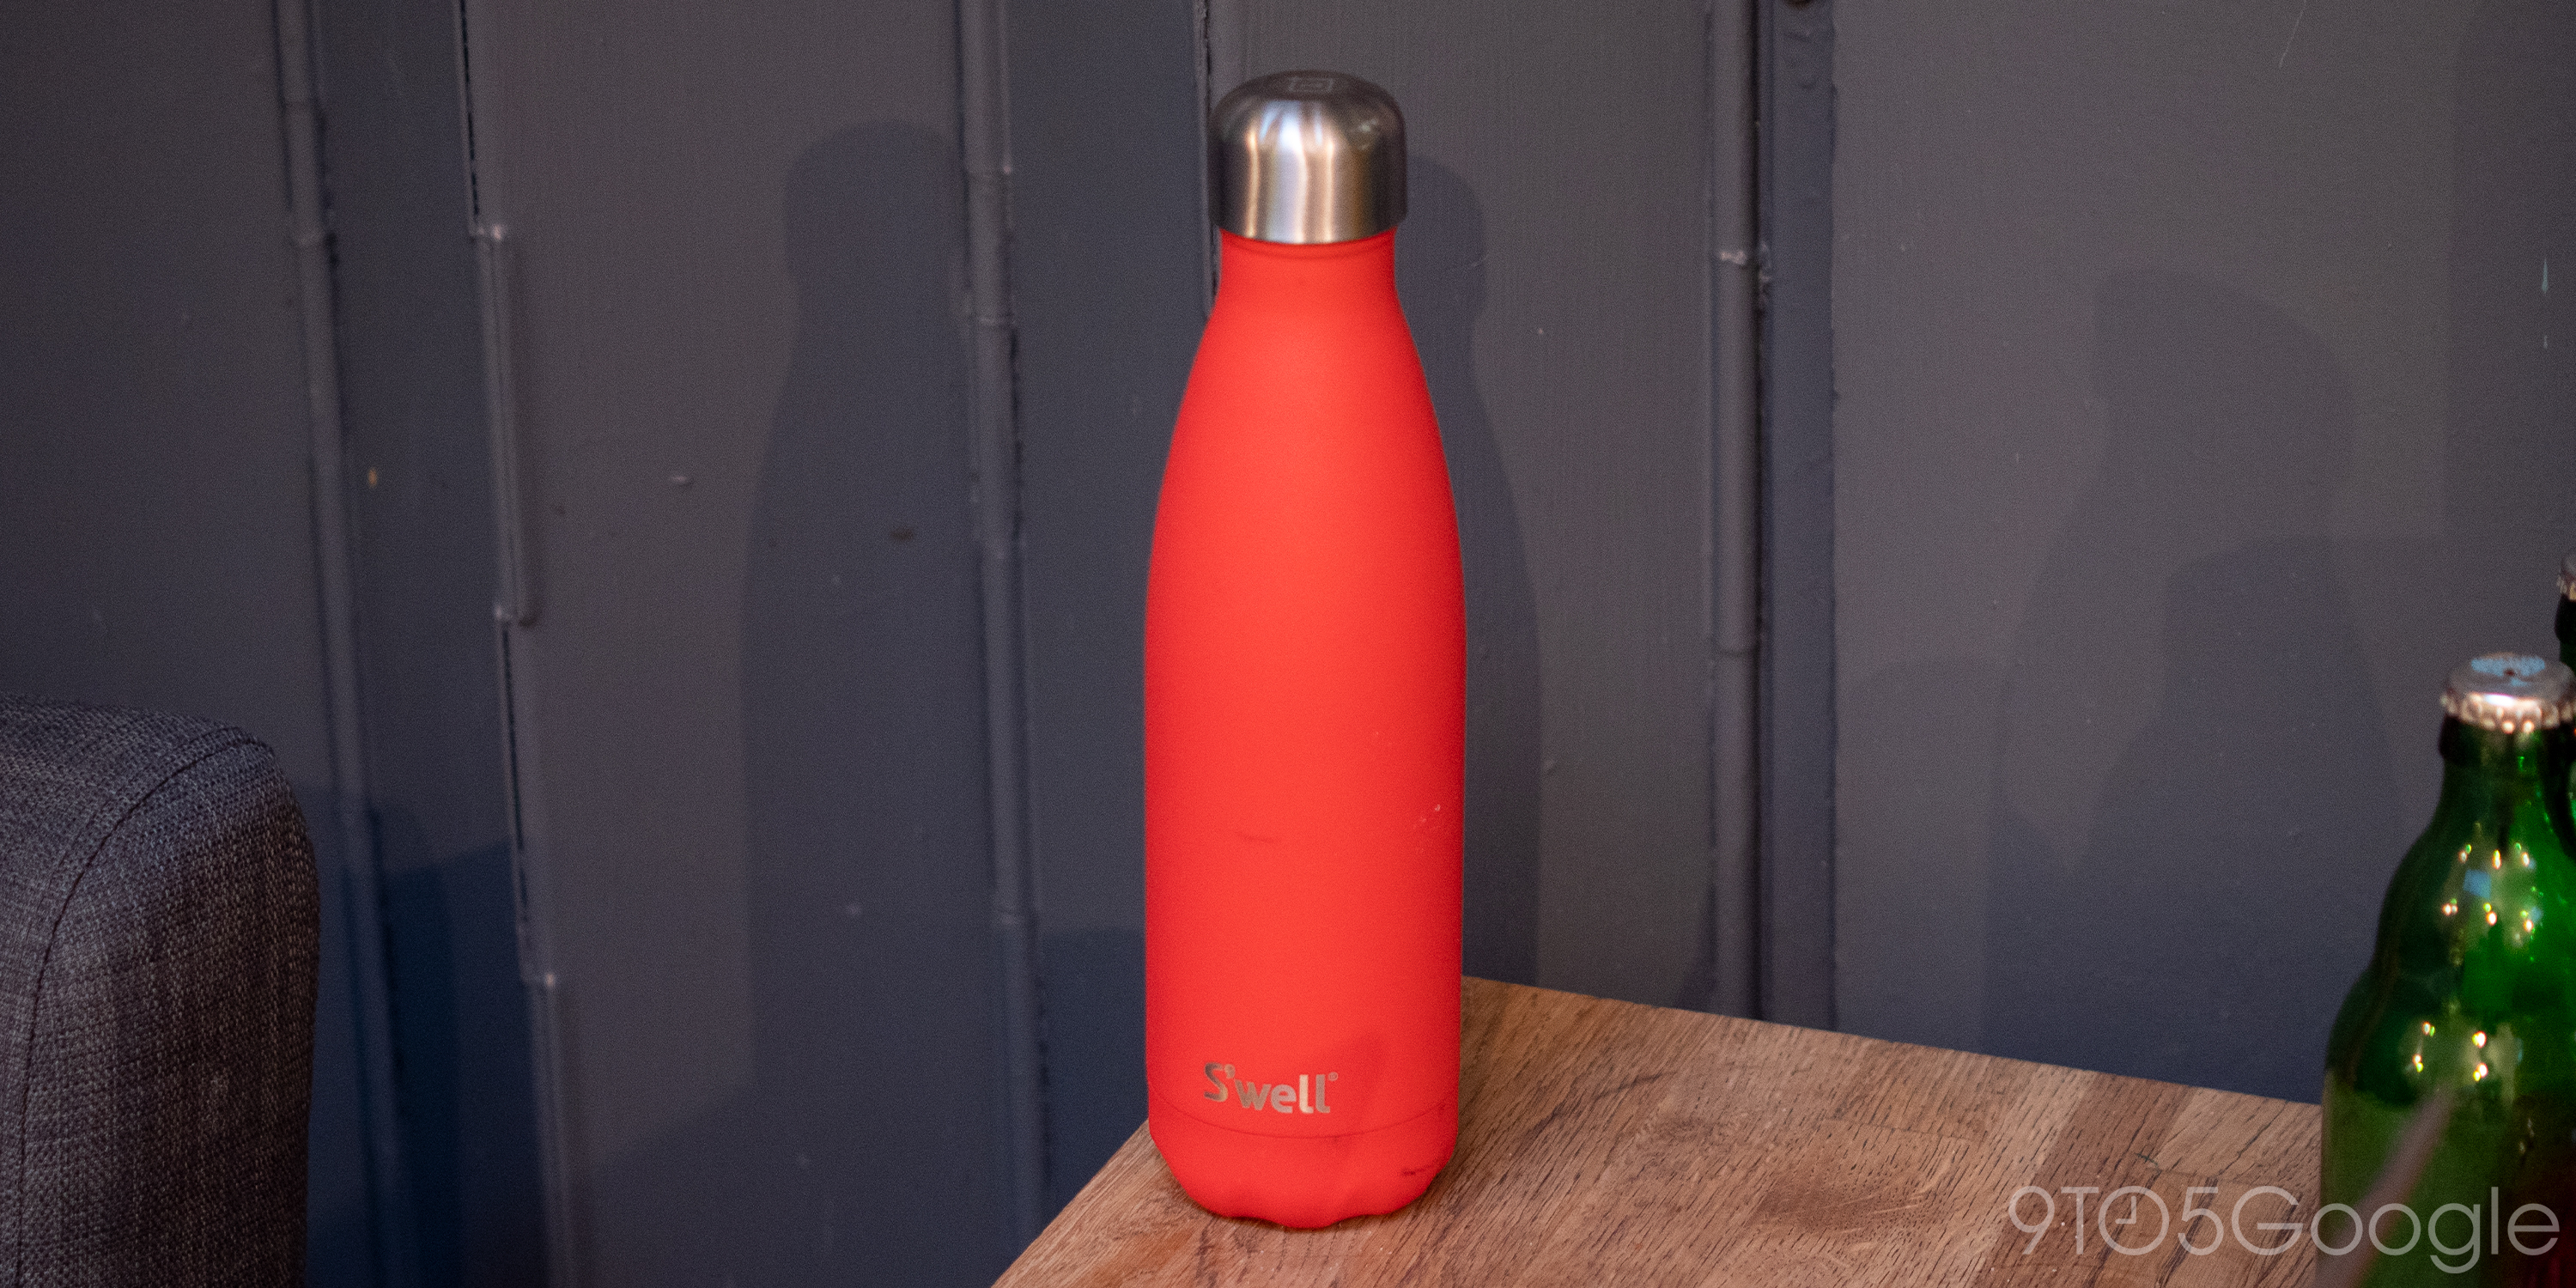 S'well bottle - digital nomad gifts